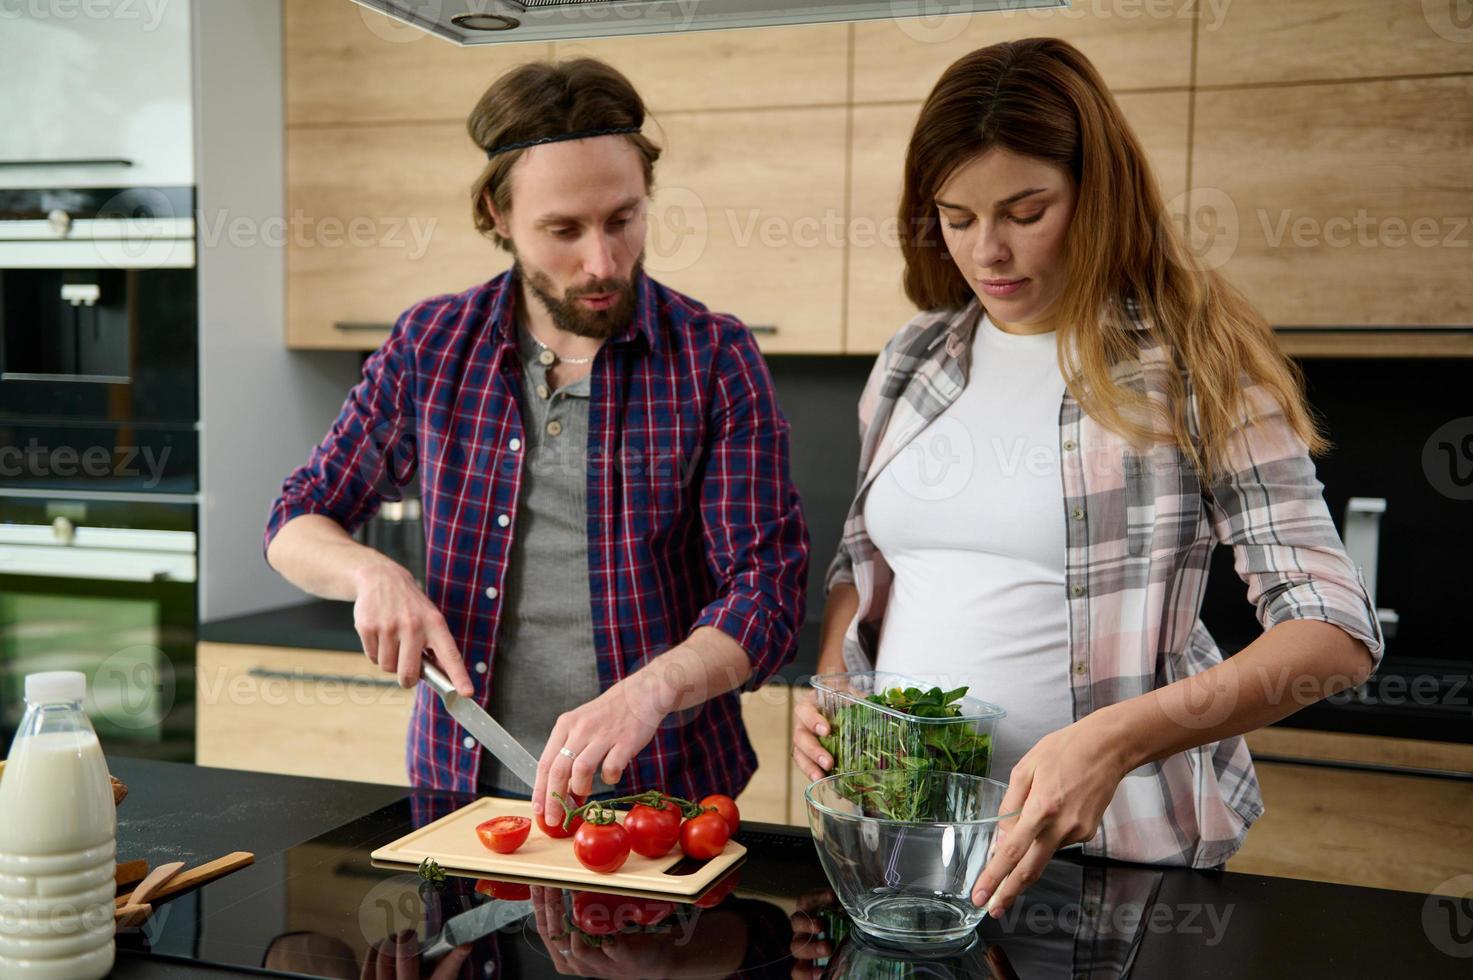 Pregnant woman holds herbs and puts them into a bowl while her husband cuts tomatoes. Beautiful heterosexual couple cooking together in a modern home kitchen photo